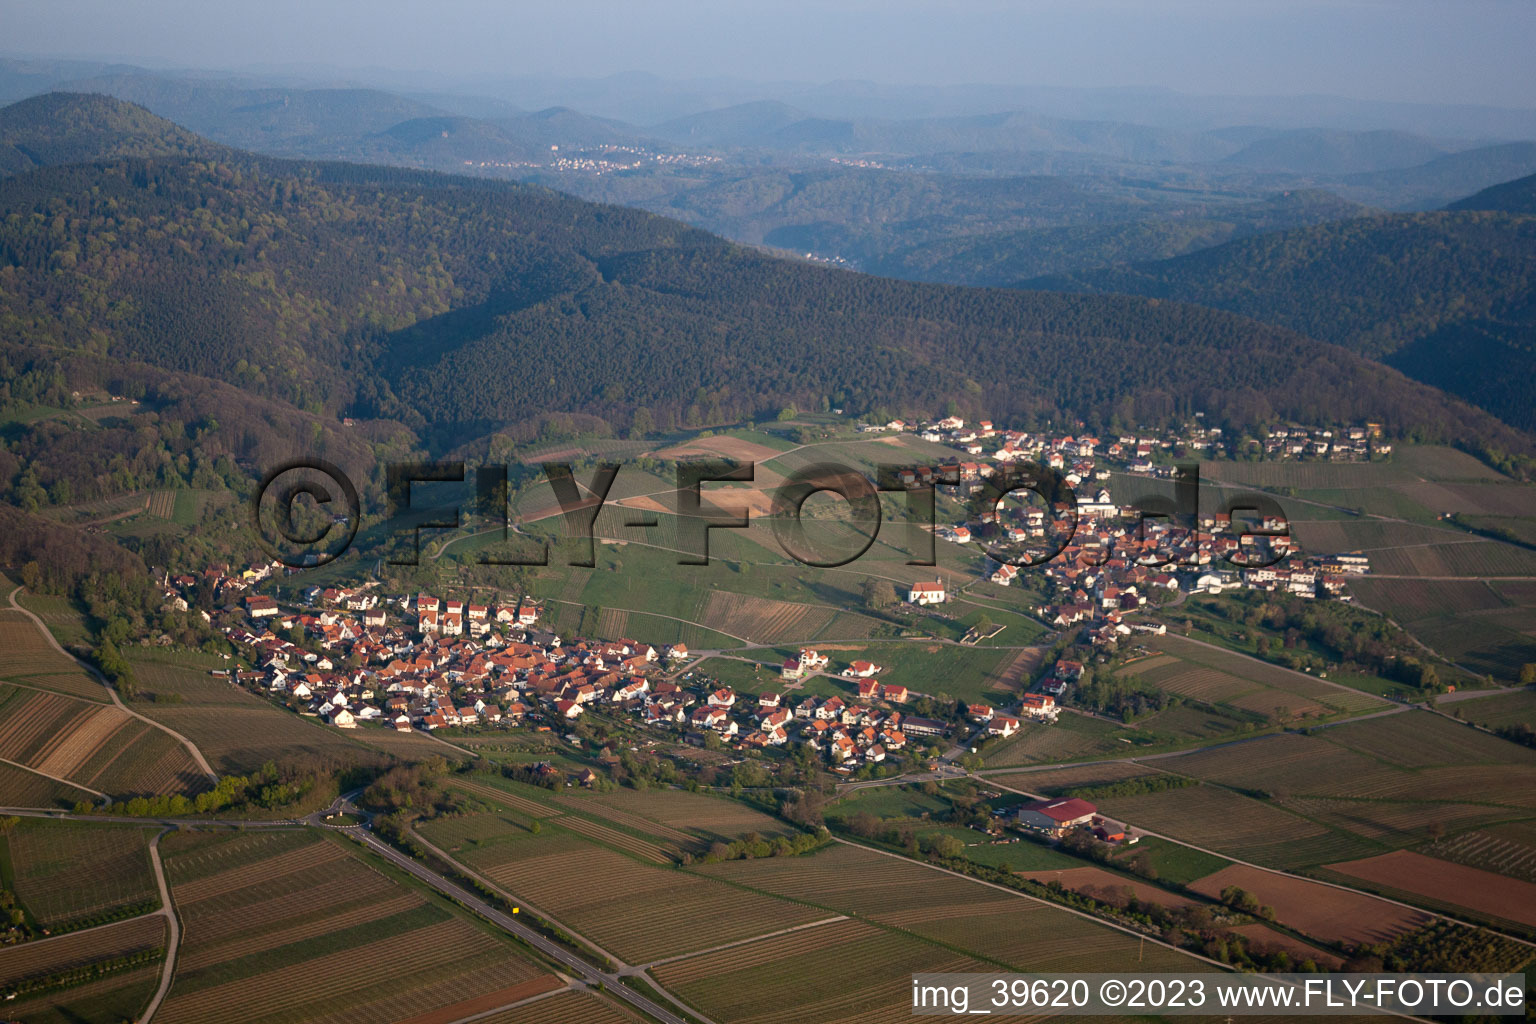 District Gleishorbach in Gleiszellen-Gleishorbach in the state Rhineland-Palatinate, Germany from above